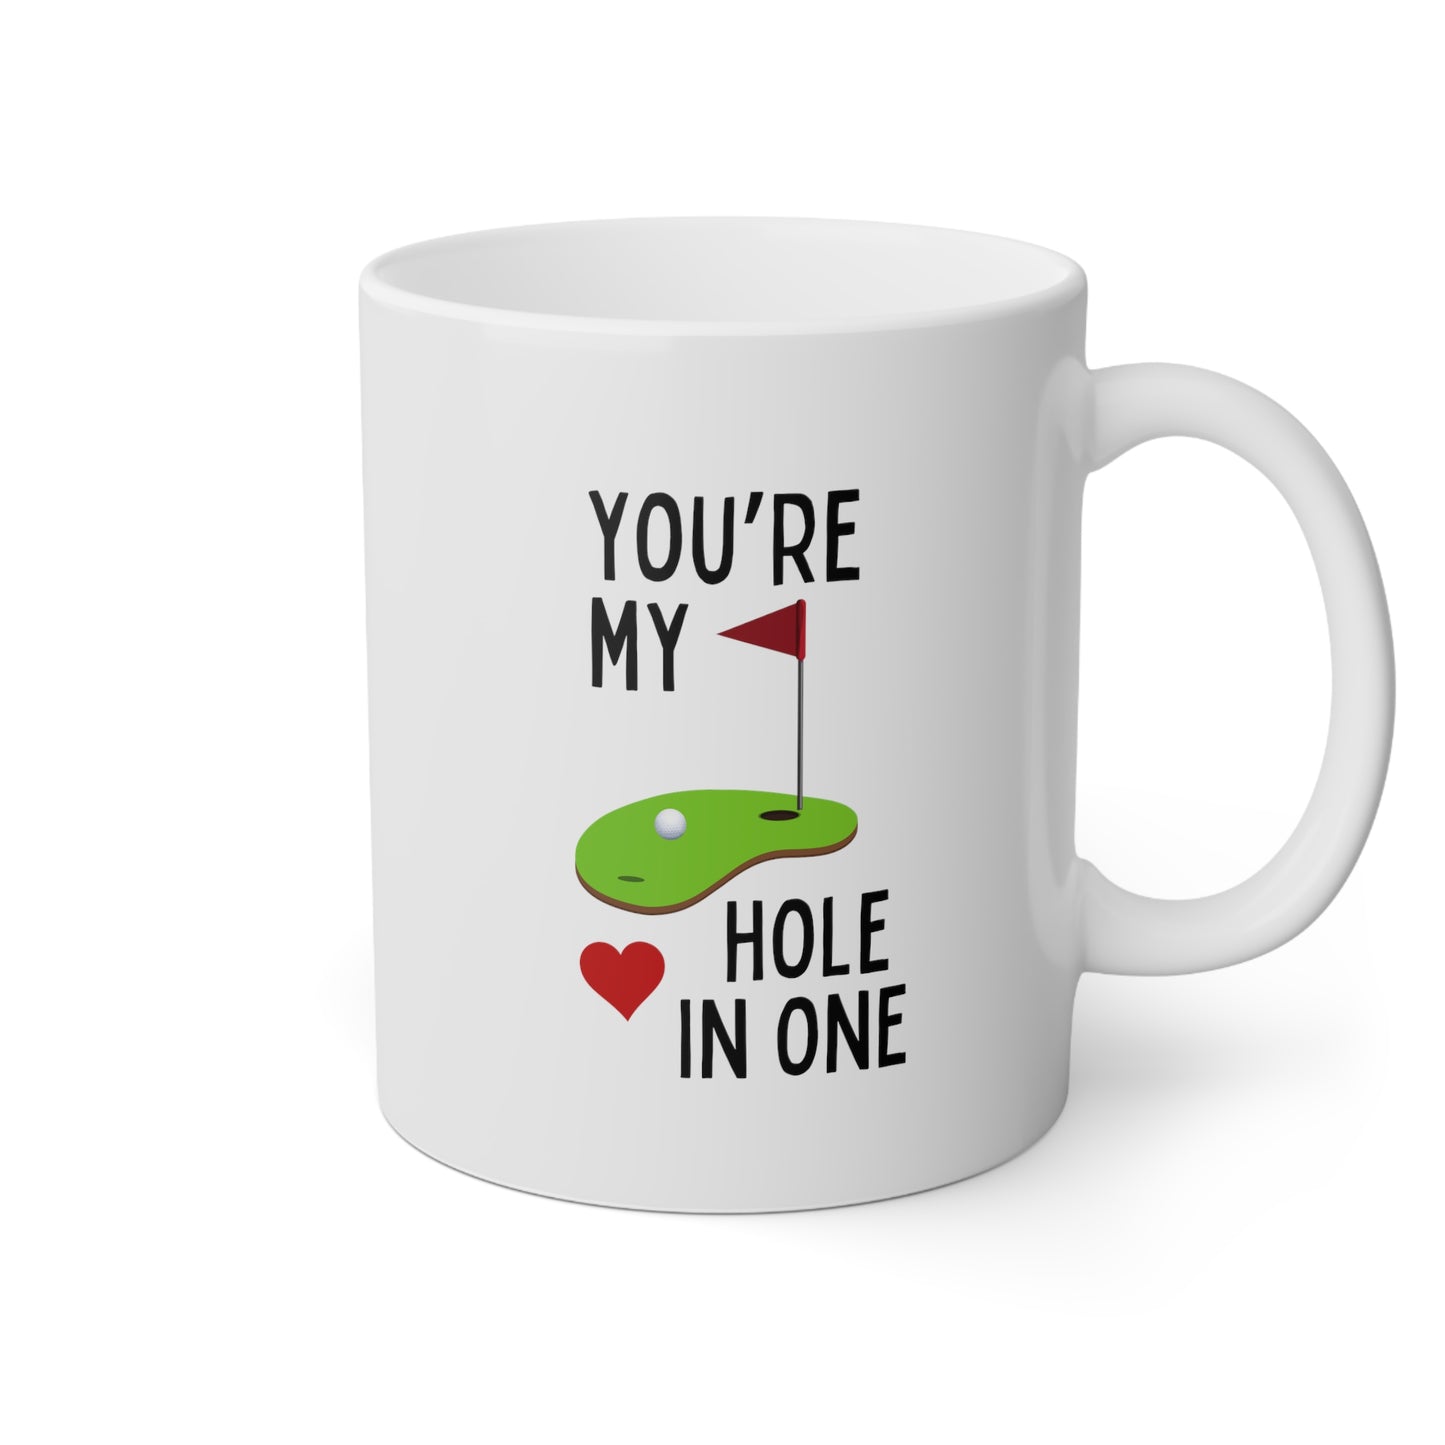 You're My Hole In One 11oz white funny large coffee mug gift for golf player lover husband boyfriend golfer waveywares wavey wares wavywares wavy wares